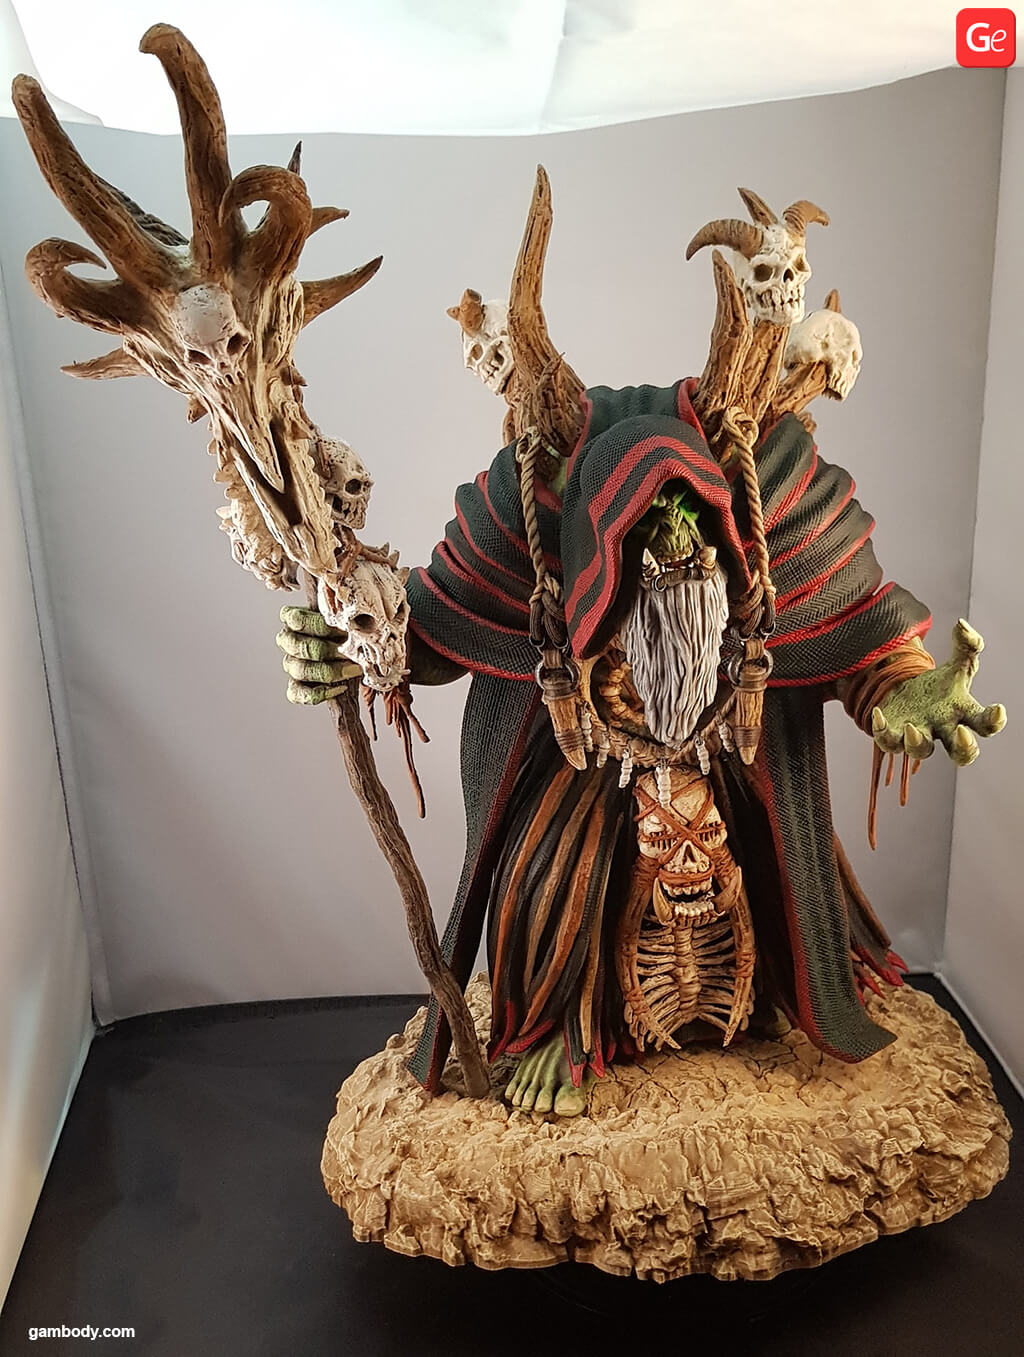 Gul'dan 3D figurine printed on Anycubic I3 Mega affordable 3D printer for beginners in 2019